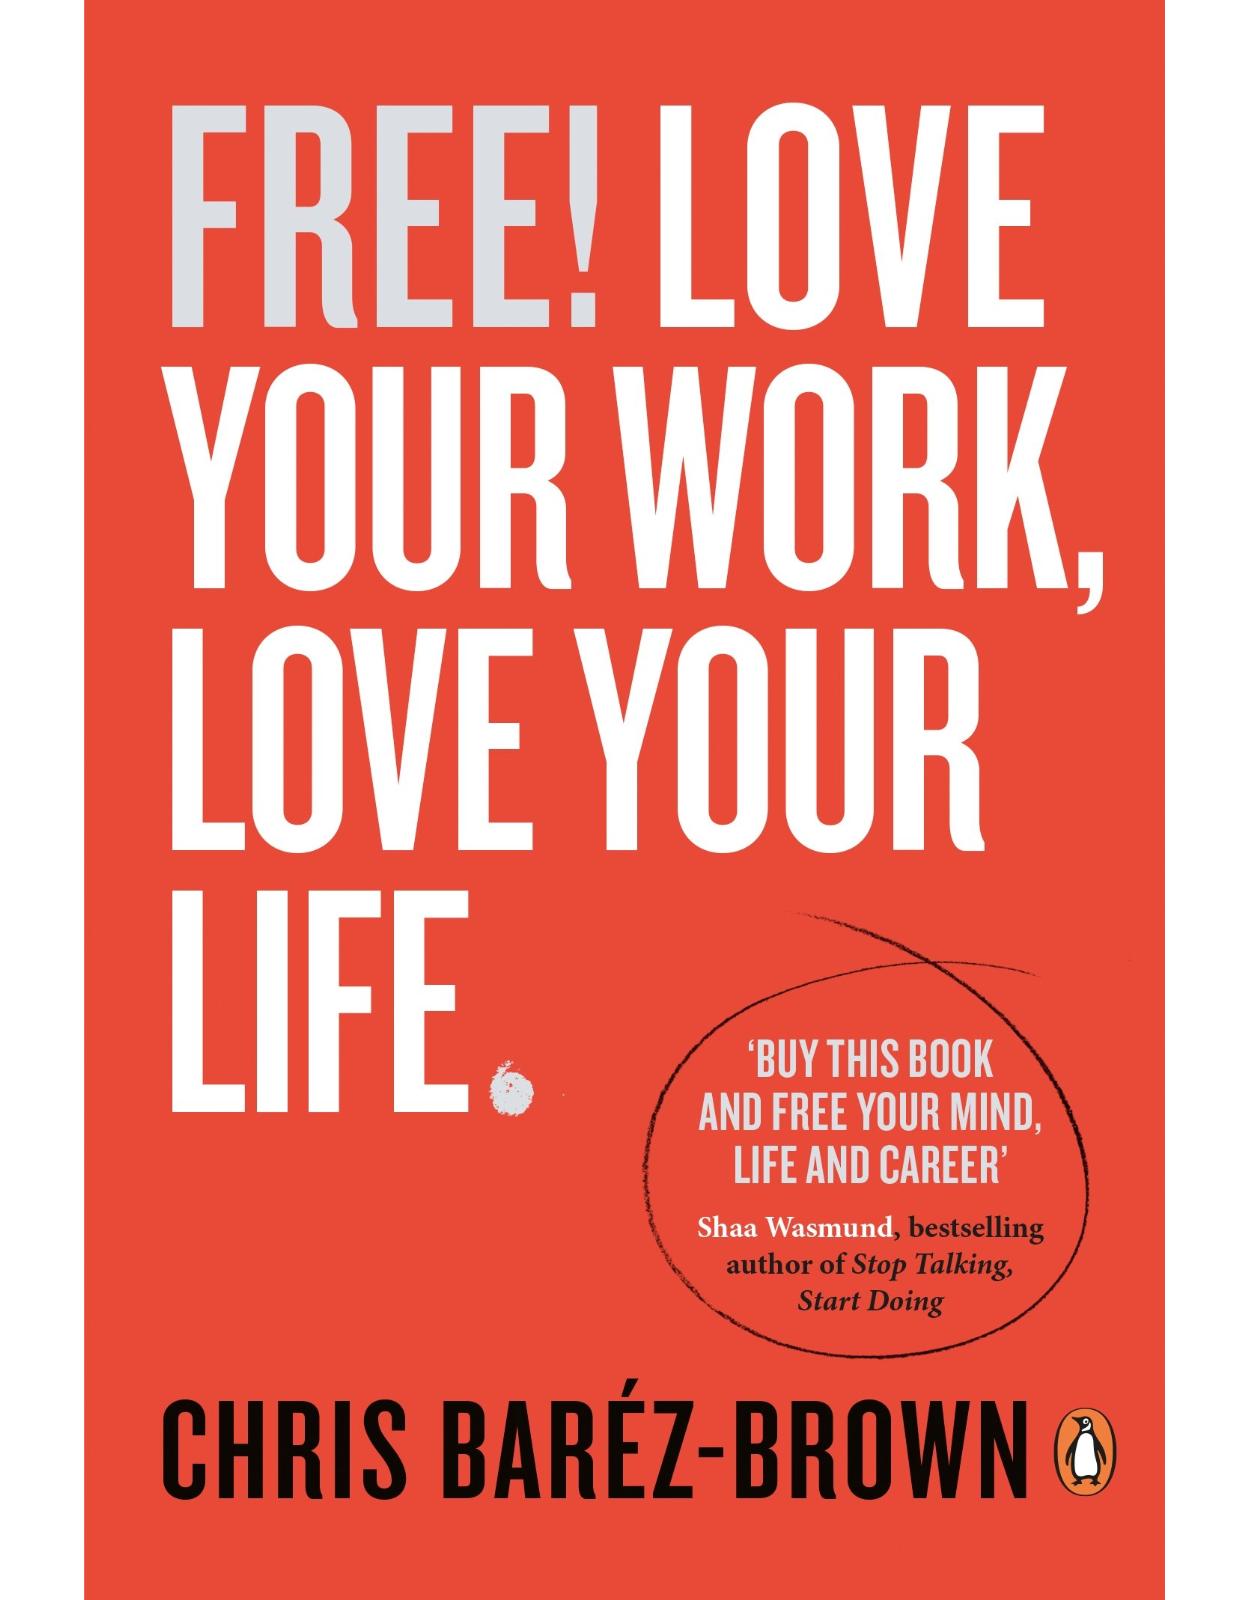 FREE: Love Your Work, Love Your Life